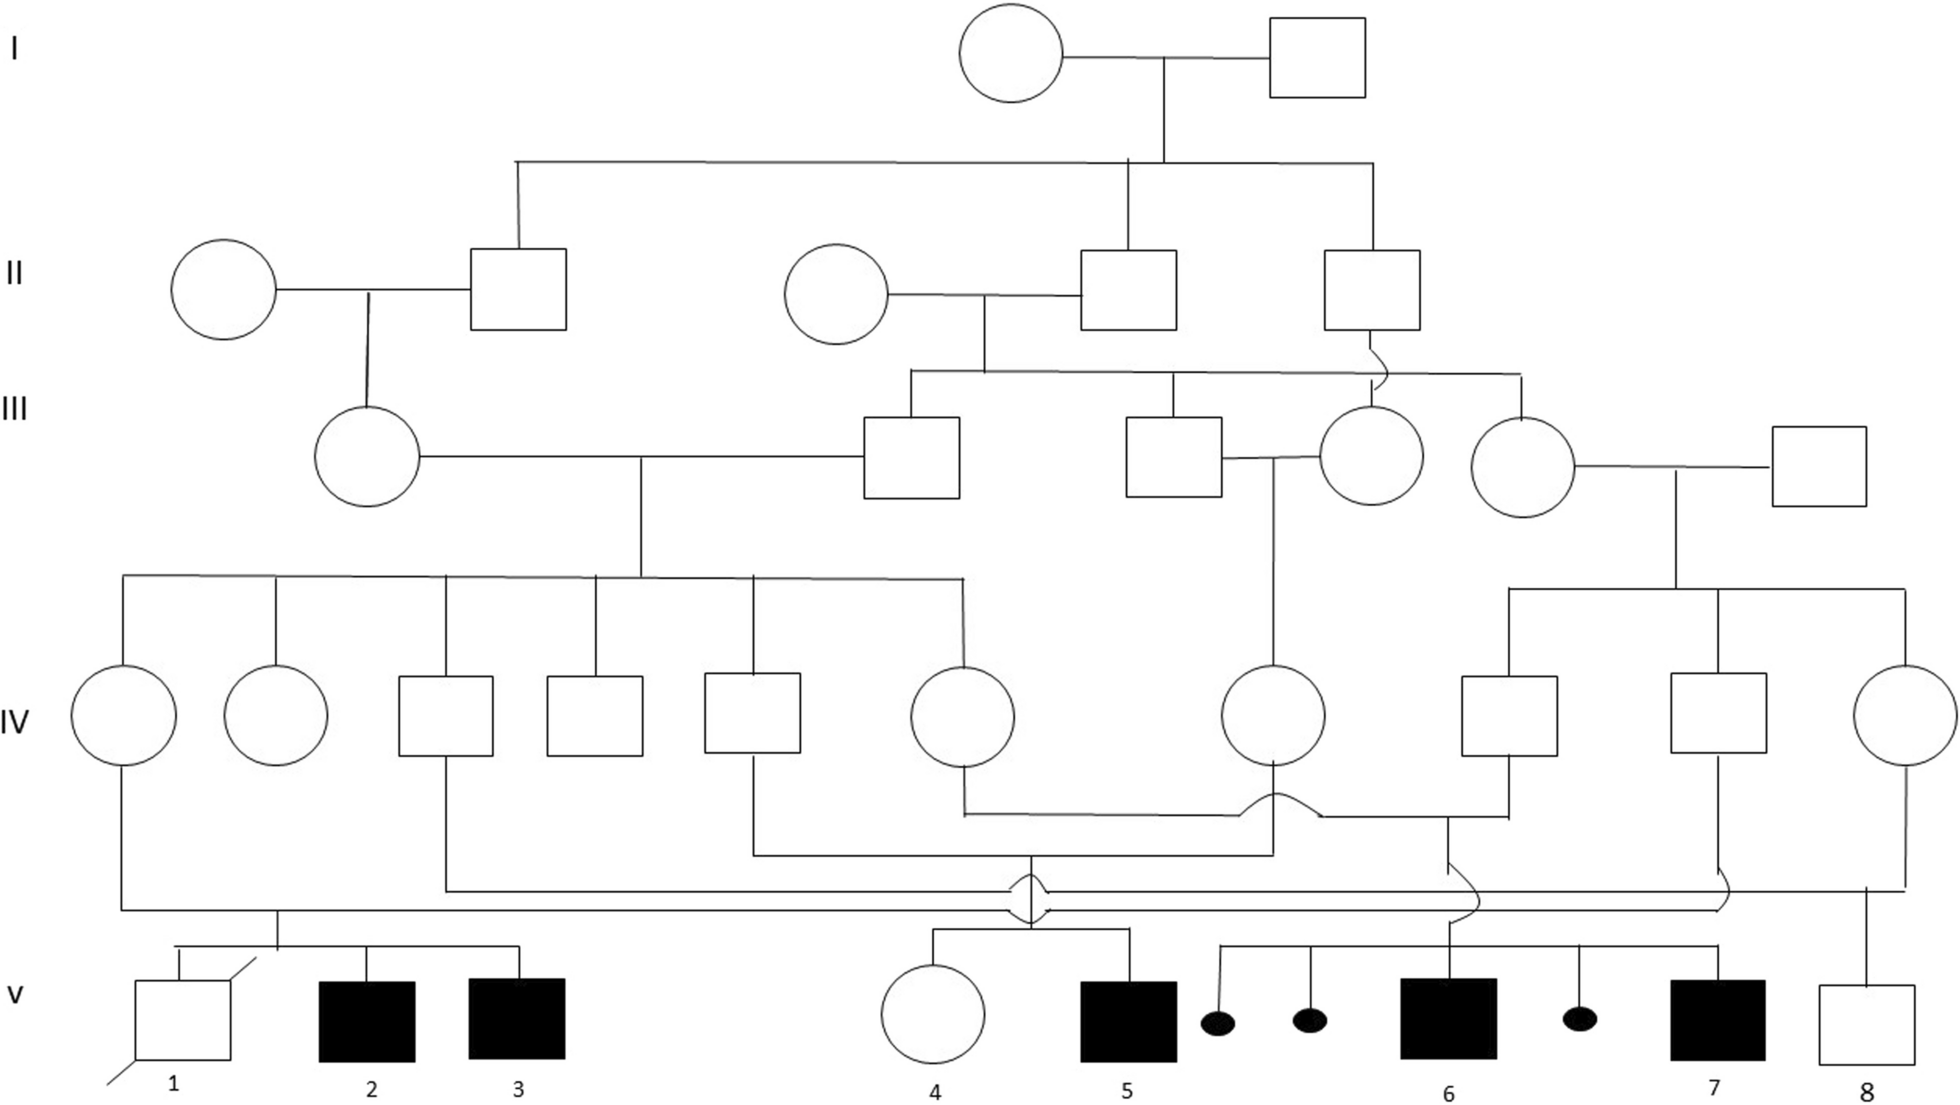 ADGRG1-related polymicrogyria syndrome: report on a large consanguineous family with a novel variant and review